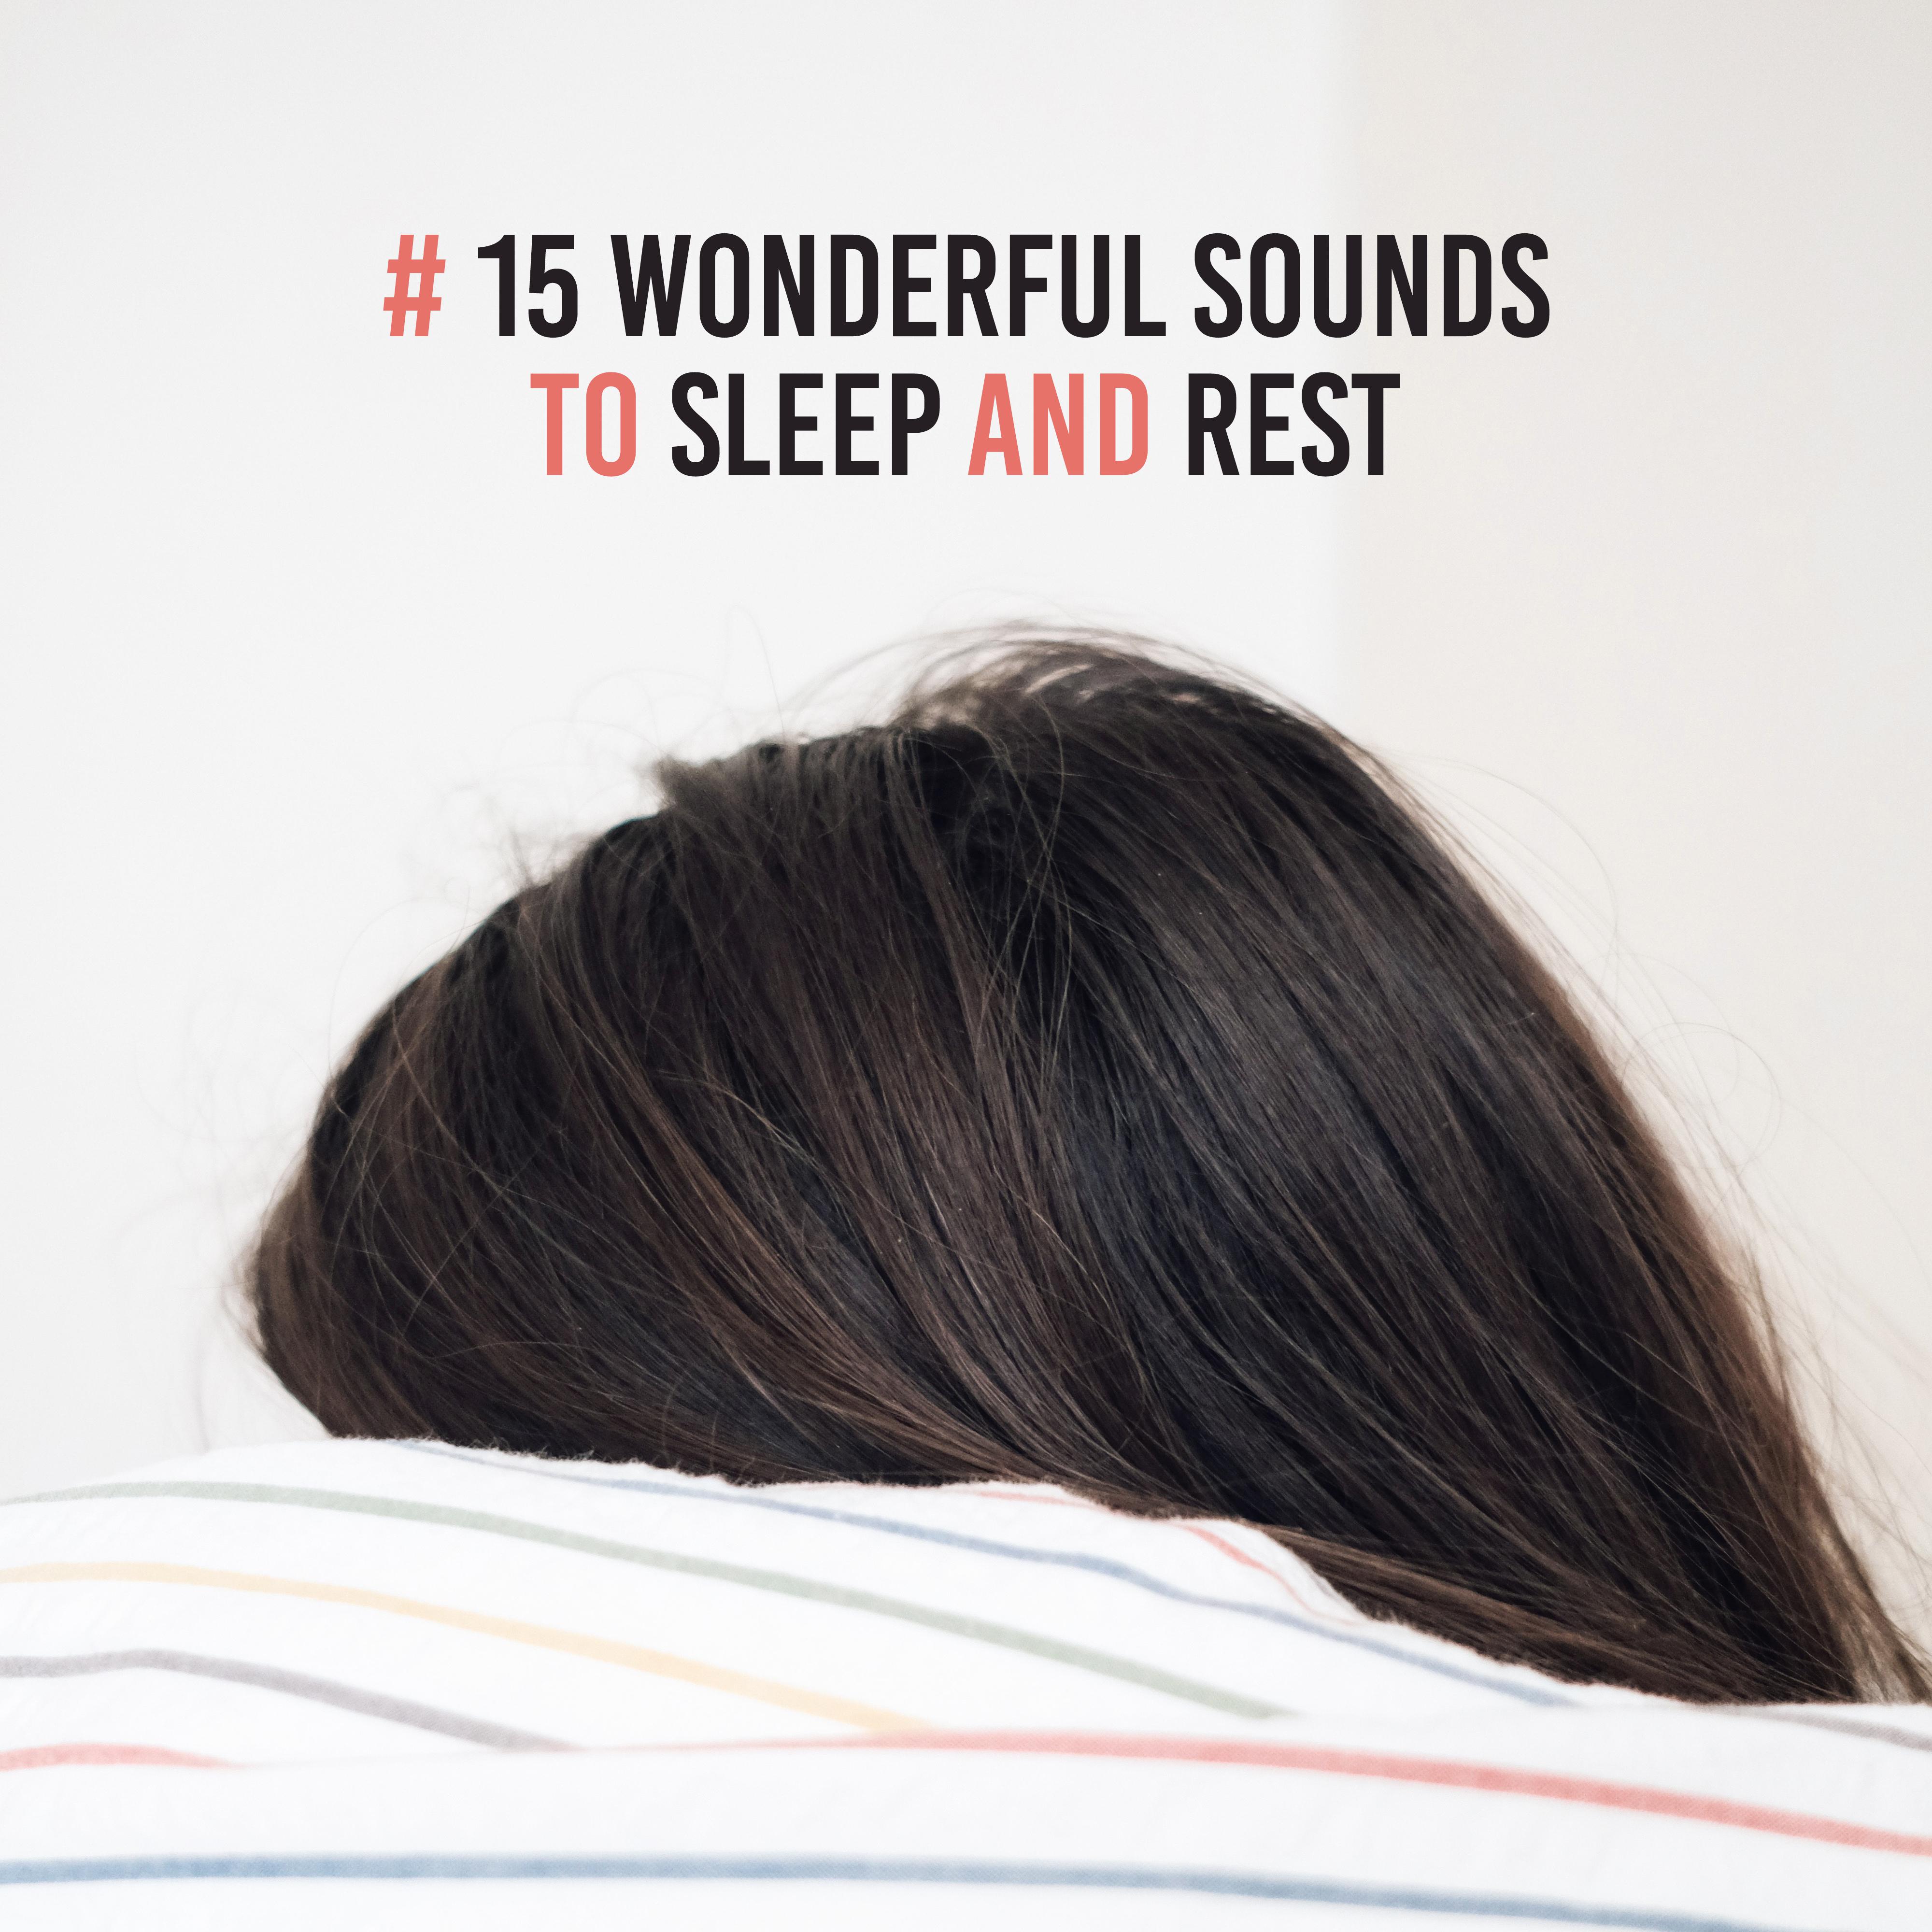 # 15 Wonderful Sounds to Sleep and Rest